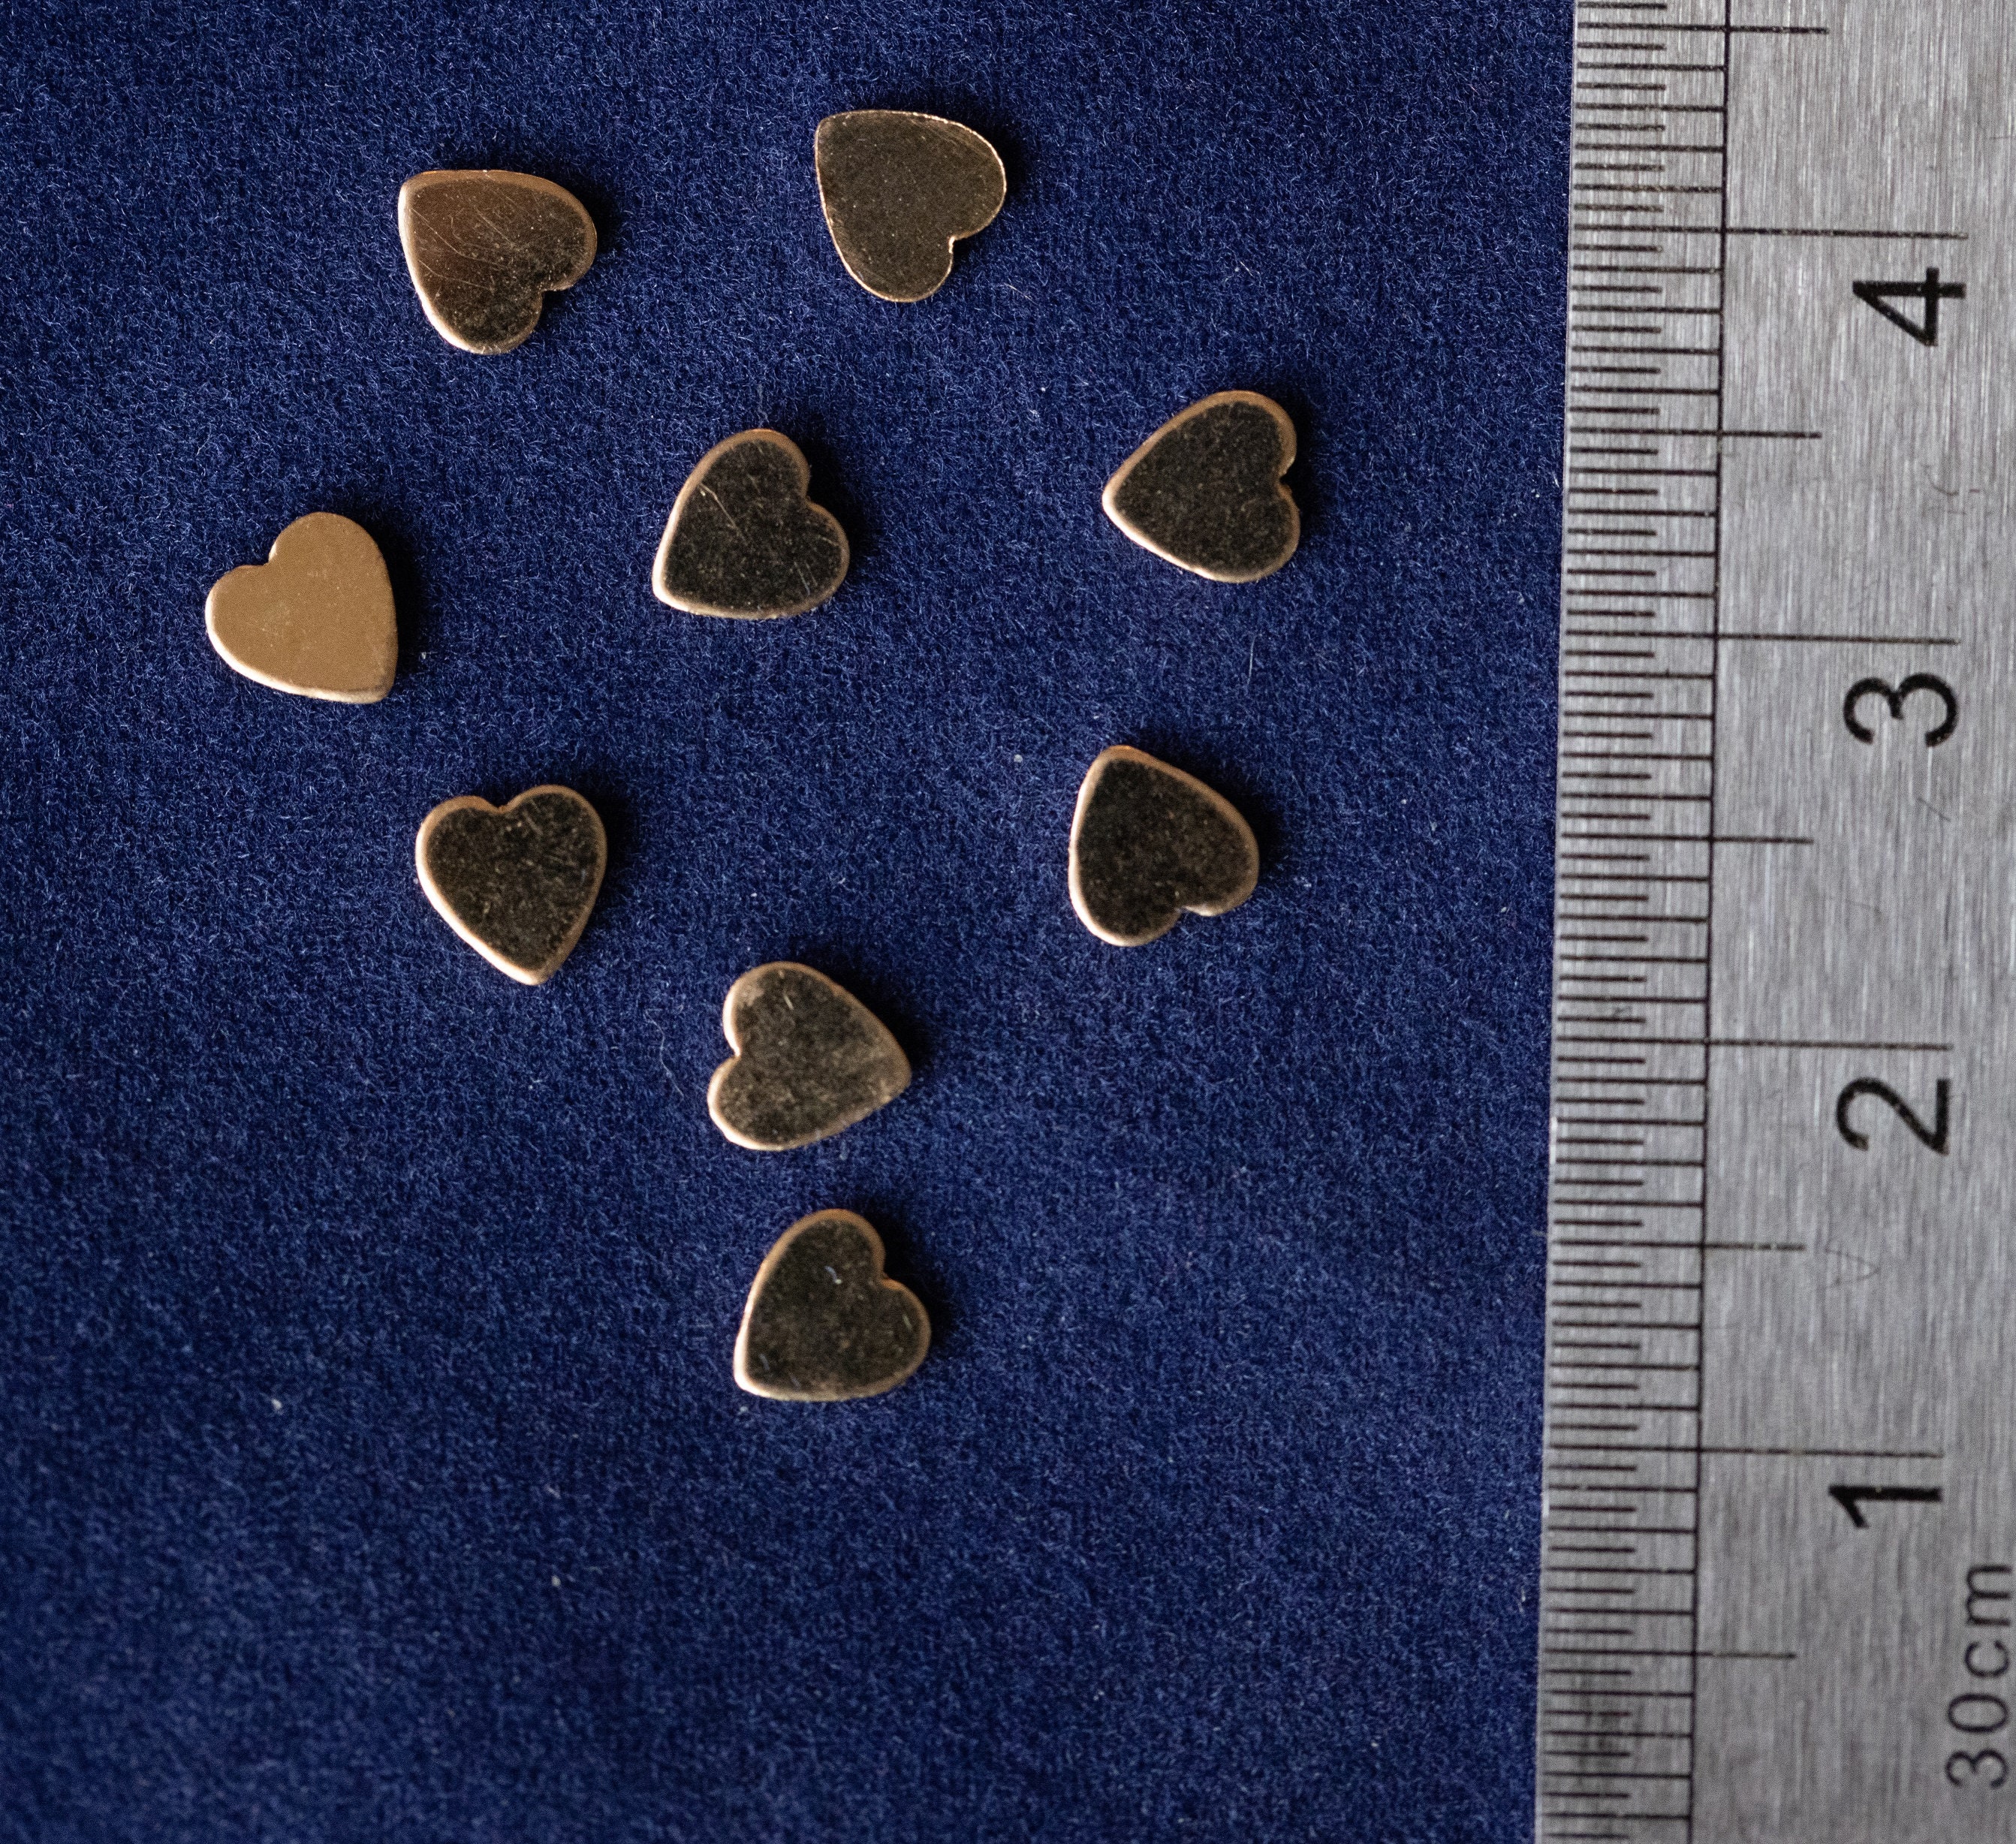 Gold Heart Bead, 5 Pc Genuine 18 K Gold Heart Shape Plated Beads with Hole  #611, Side to Side 2 mm Holes